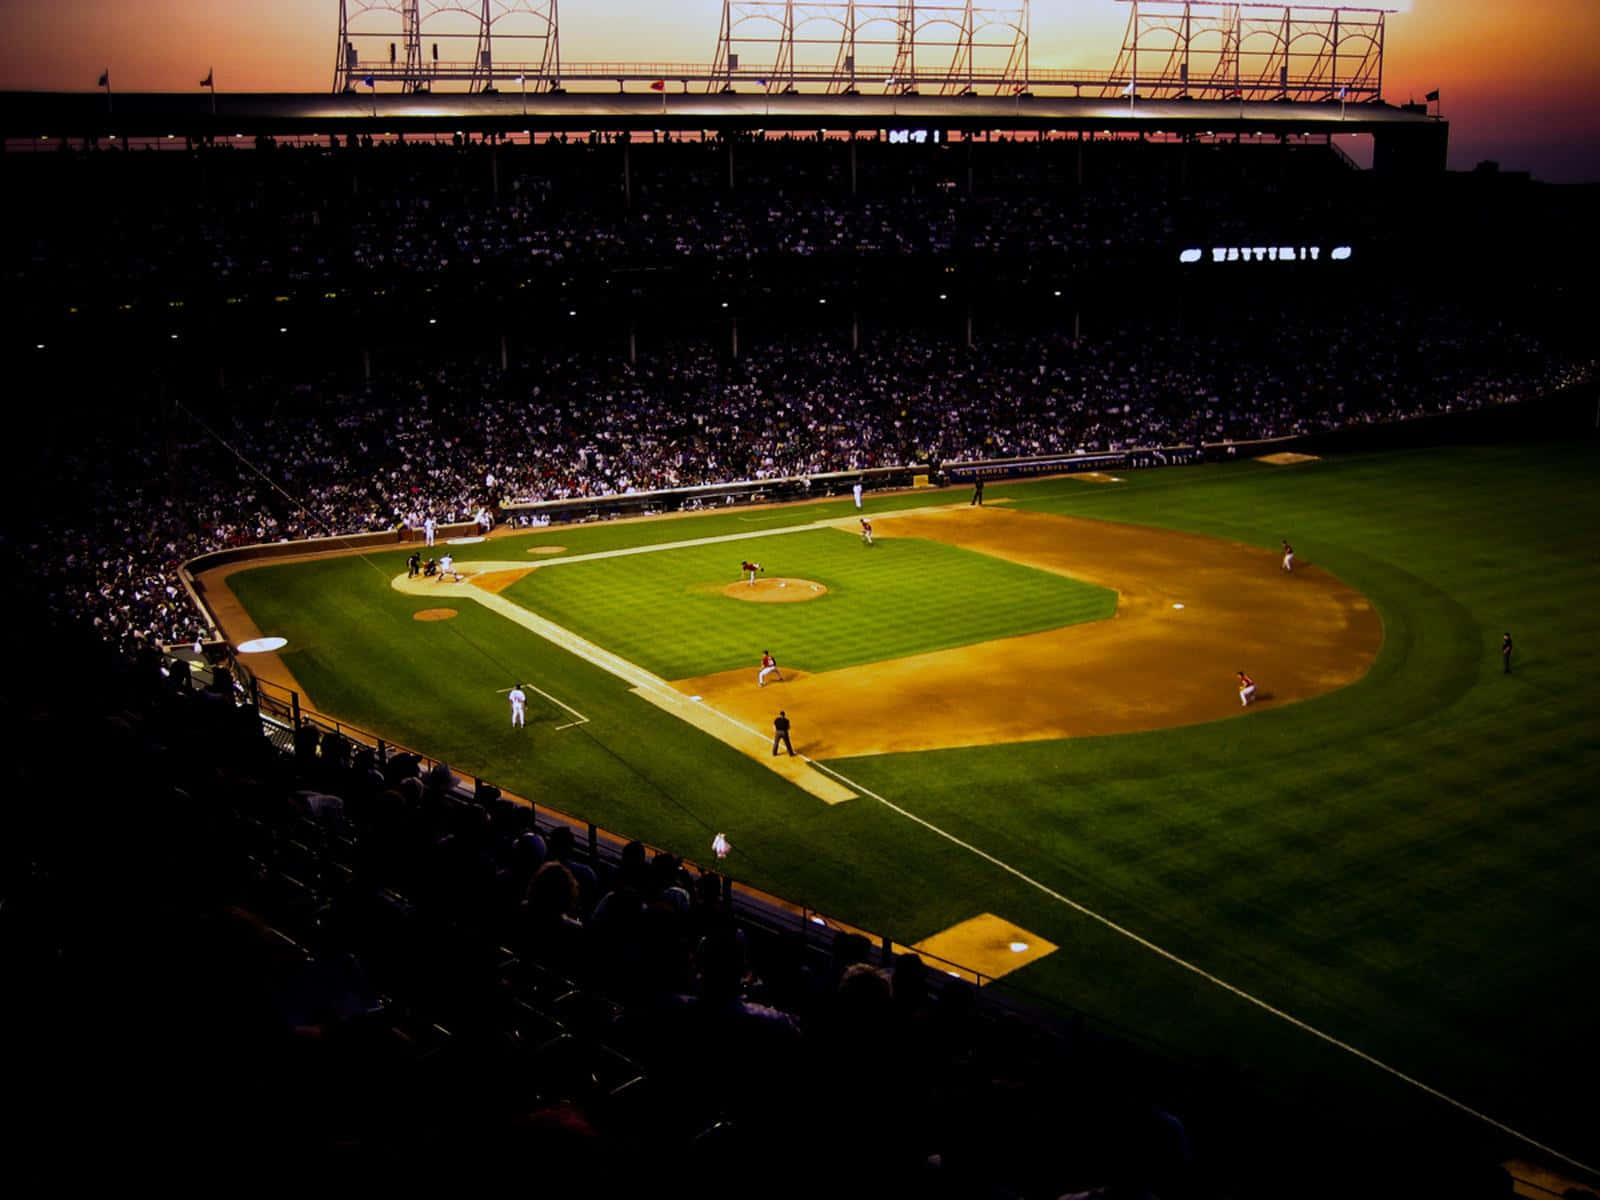 A breathtaking view of a baseball stadium packed with cheering fans Wallpaper